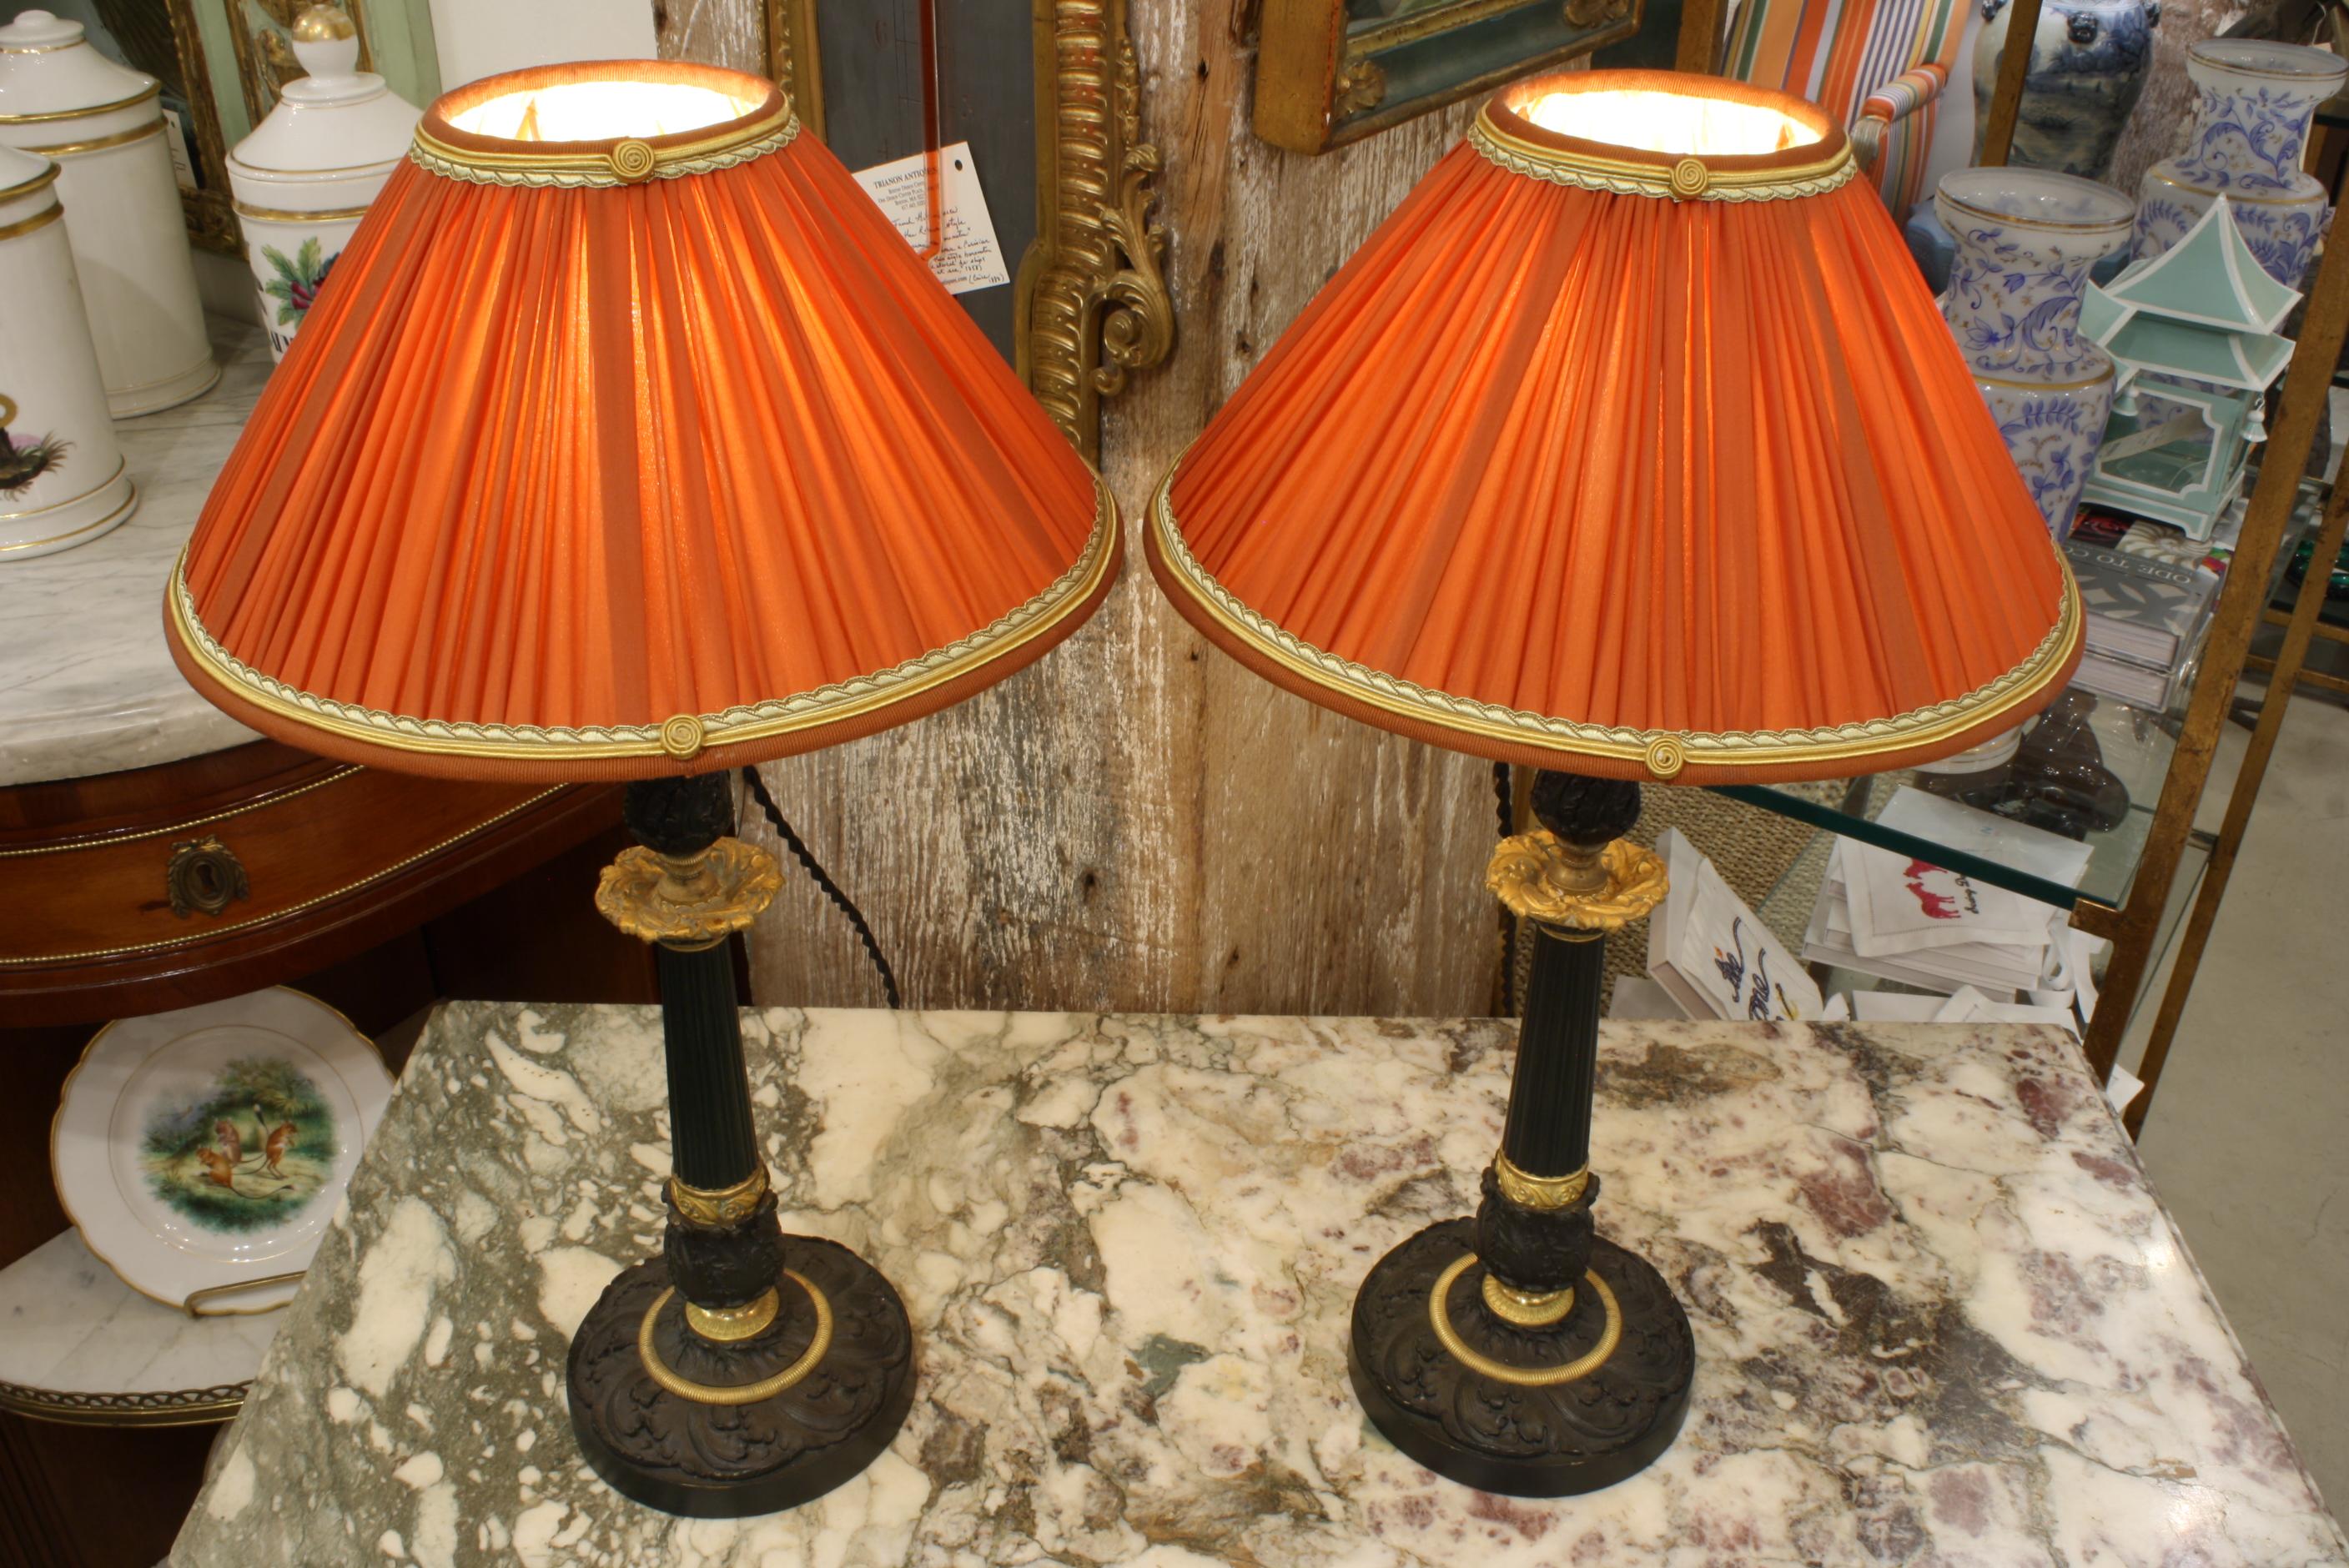 Restauration Pair of Gilt and Patinated Bronze Candlestick Lamps with Orange Silk Shades For Sale